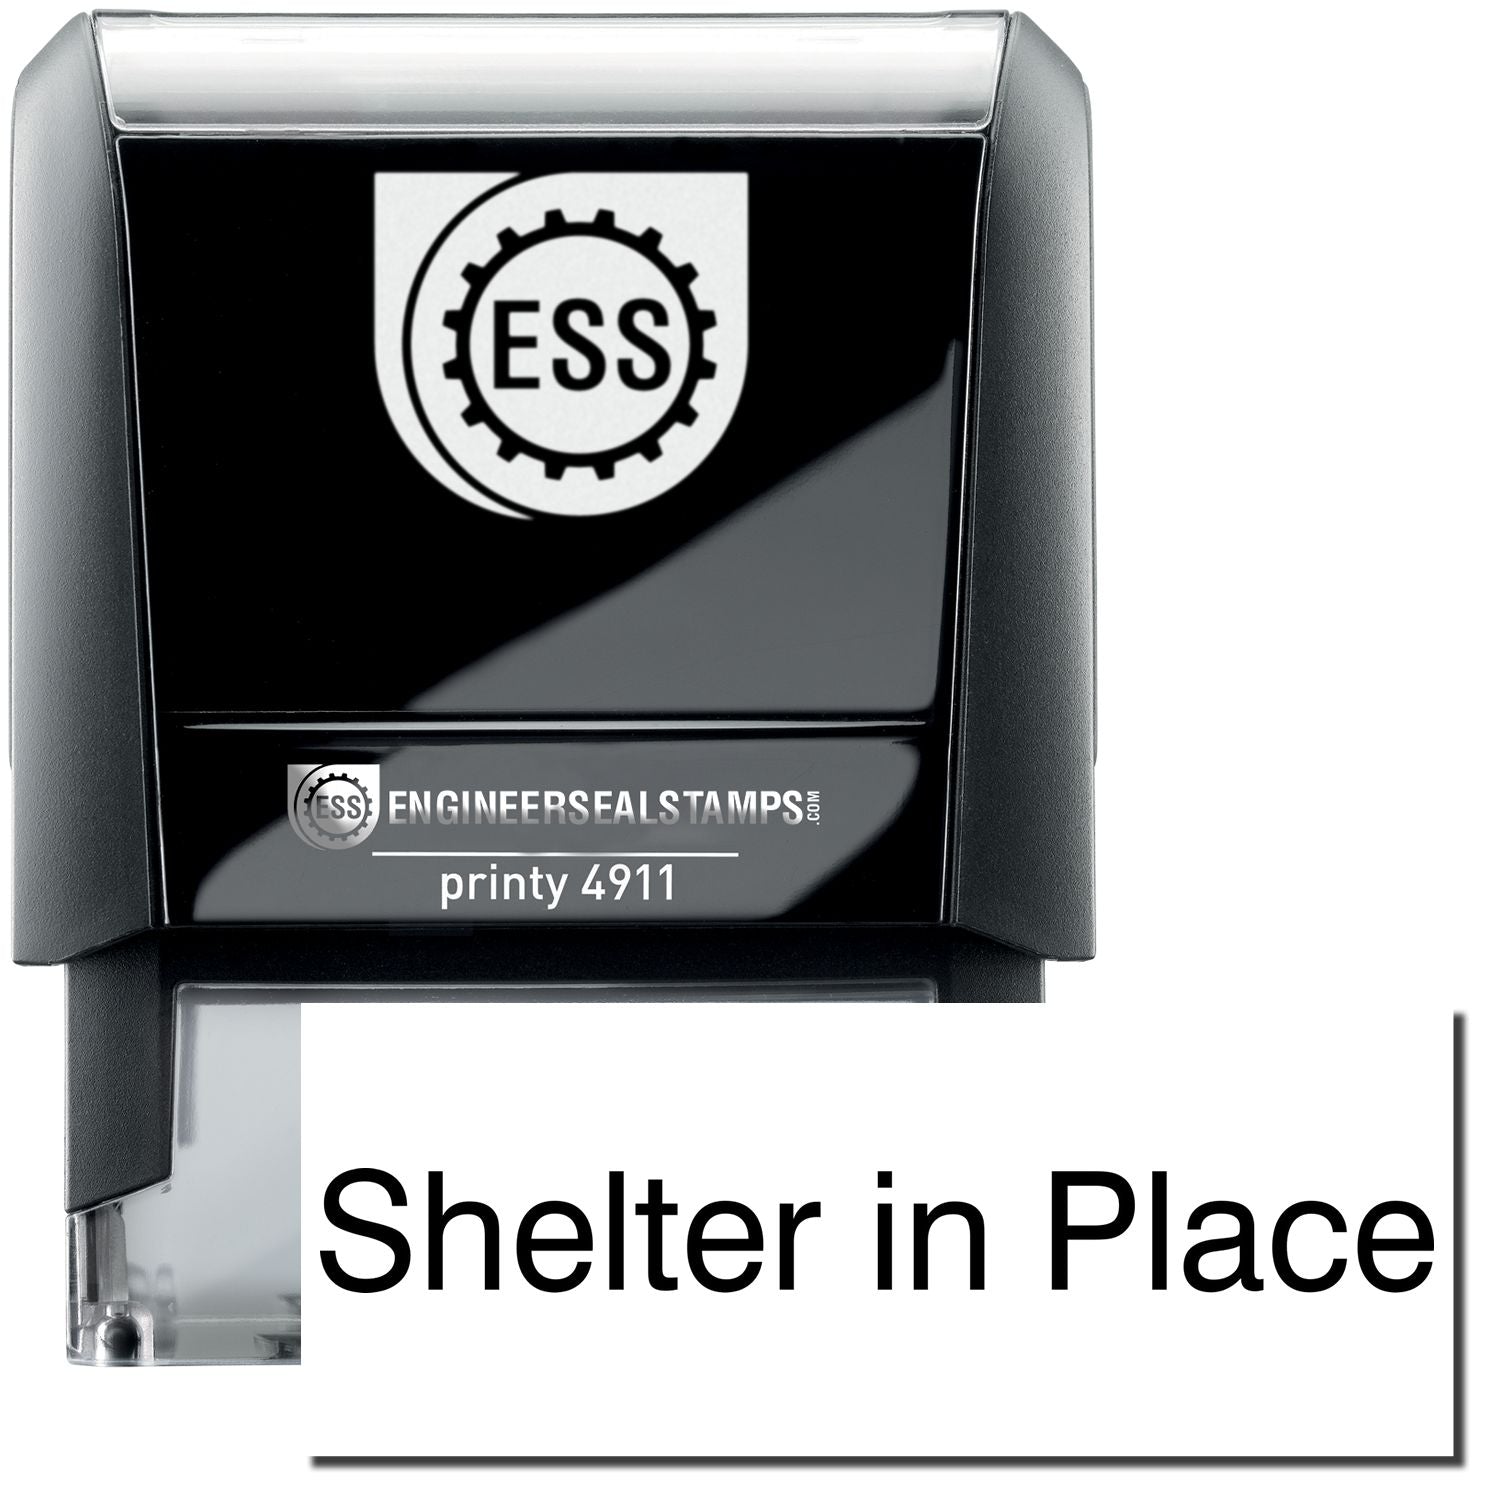 A self-inking stamp with a stamped image showing how the text "Shelter in Place" is displayed after stamping.